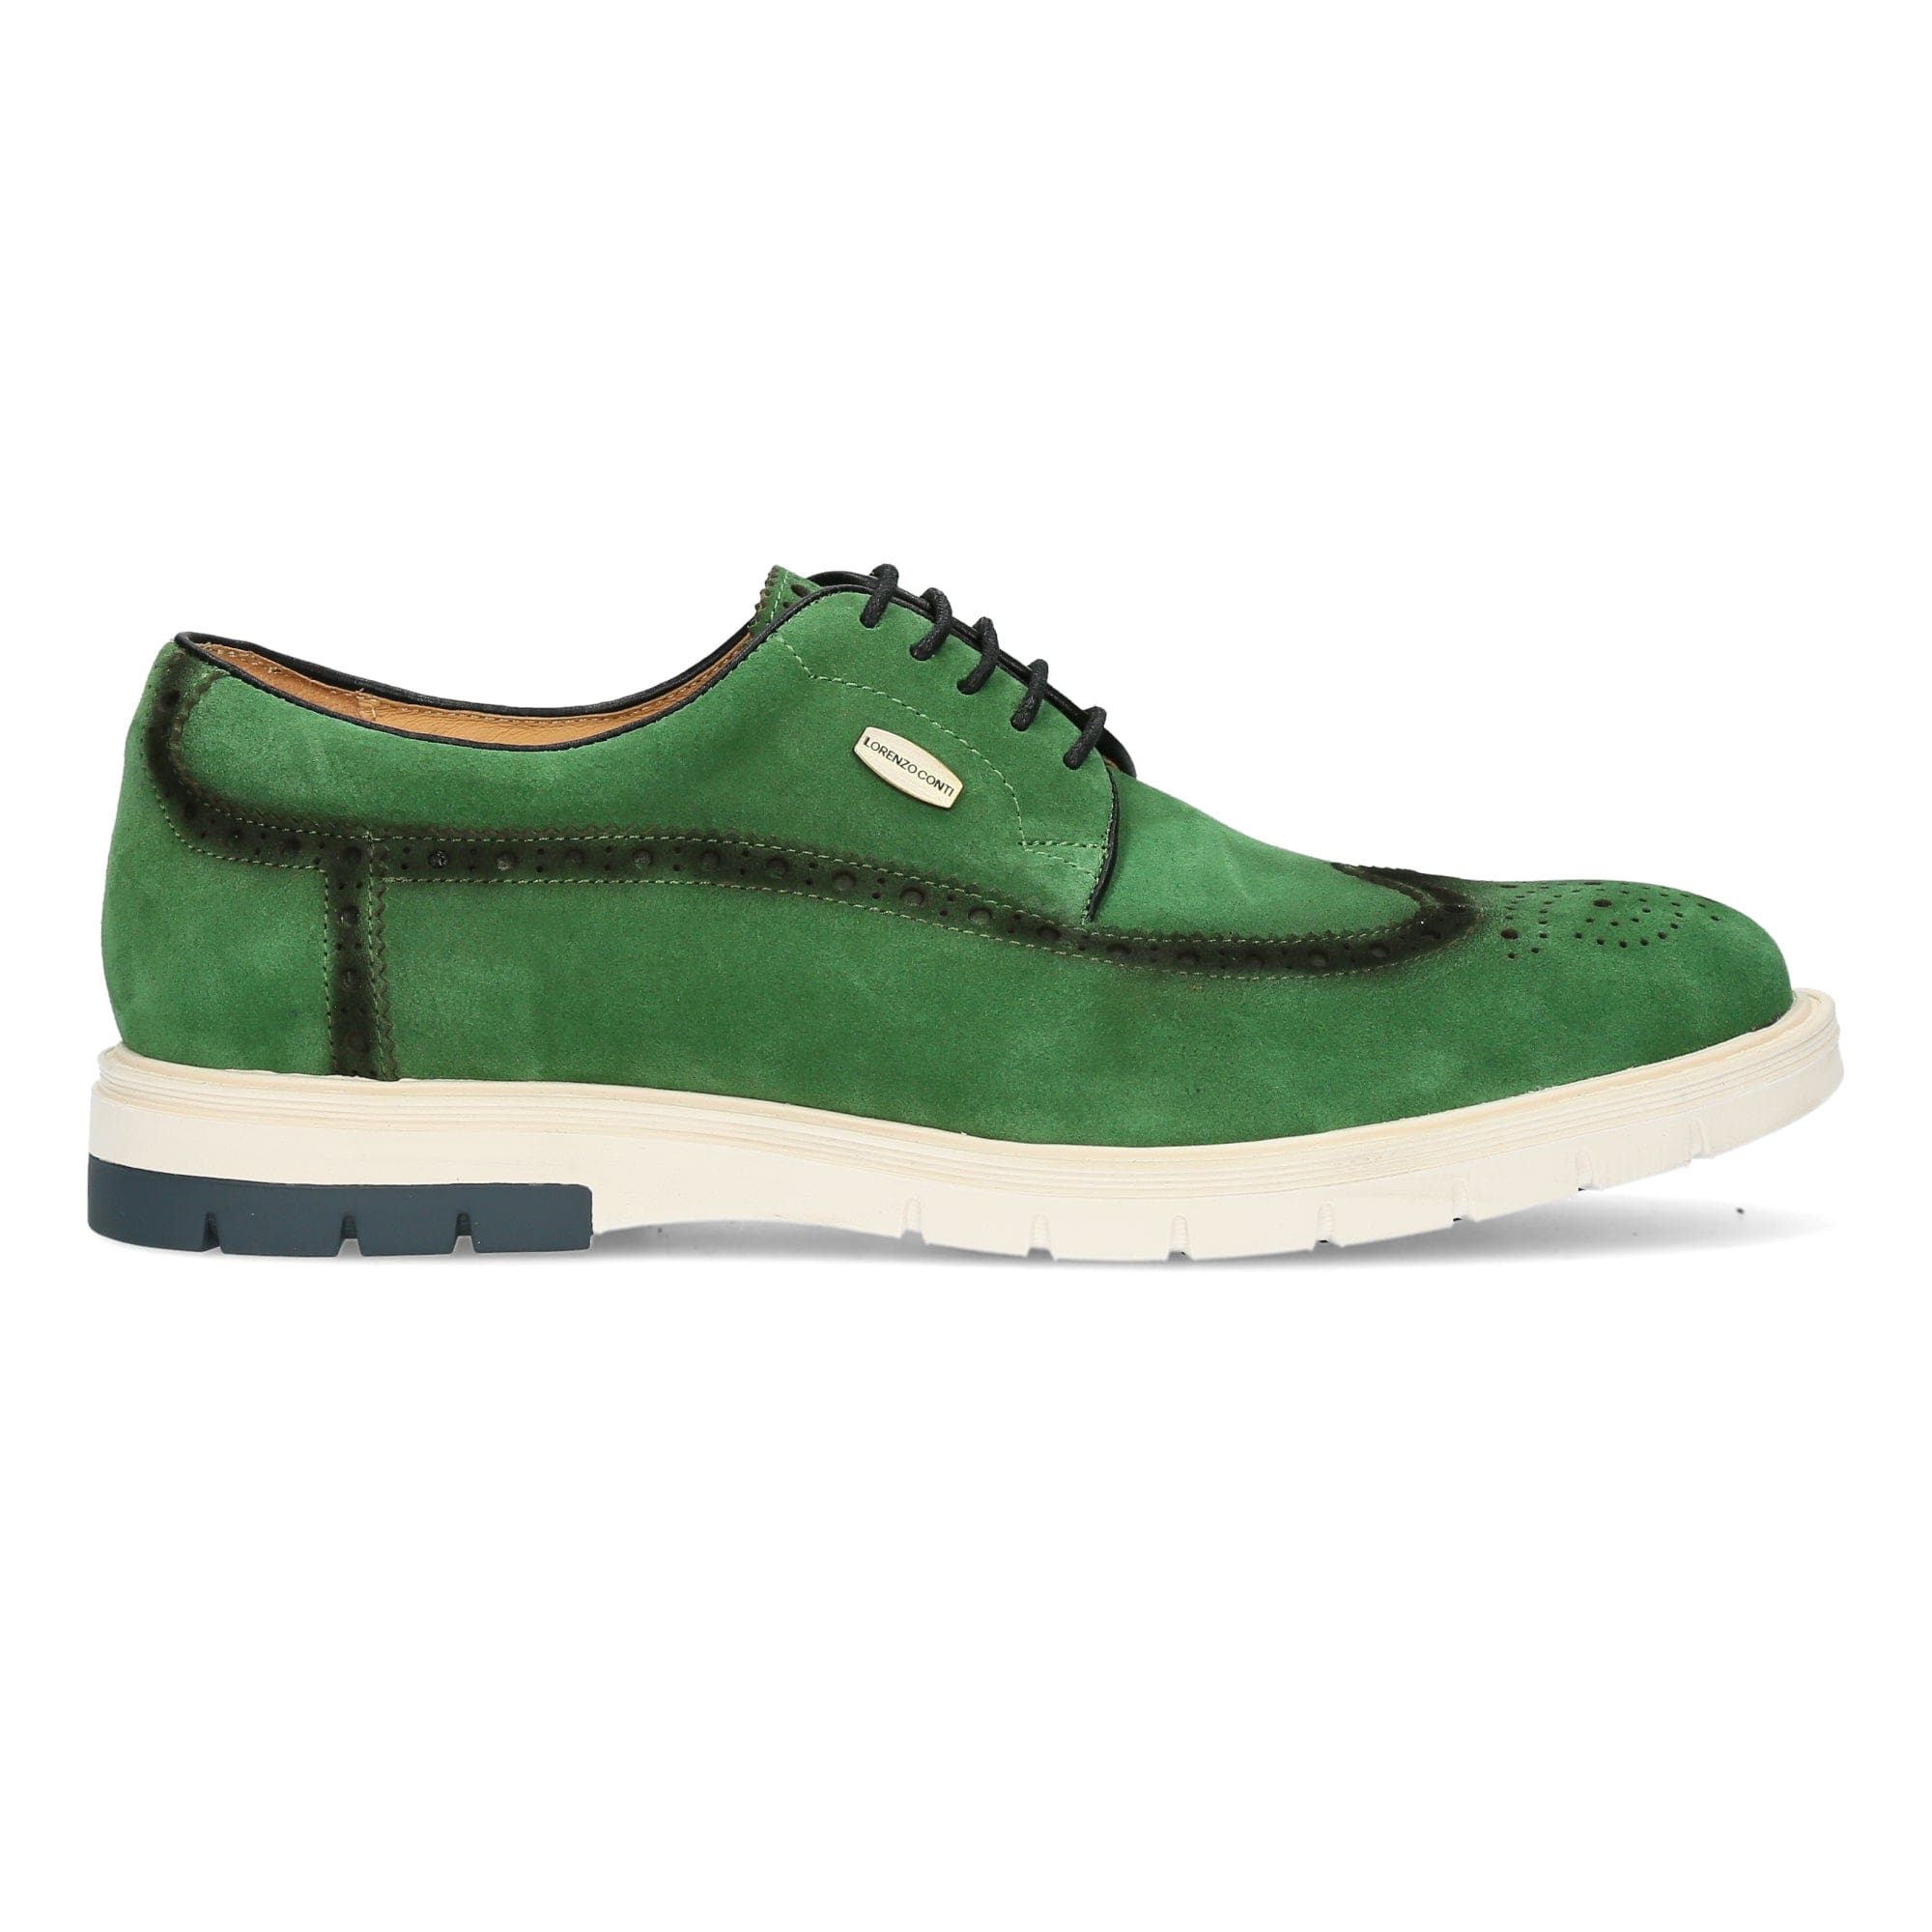 Chaussure Homme ARNO 01 - 40 / Vert - Soulier